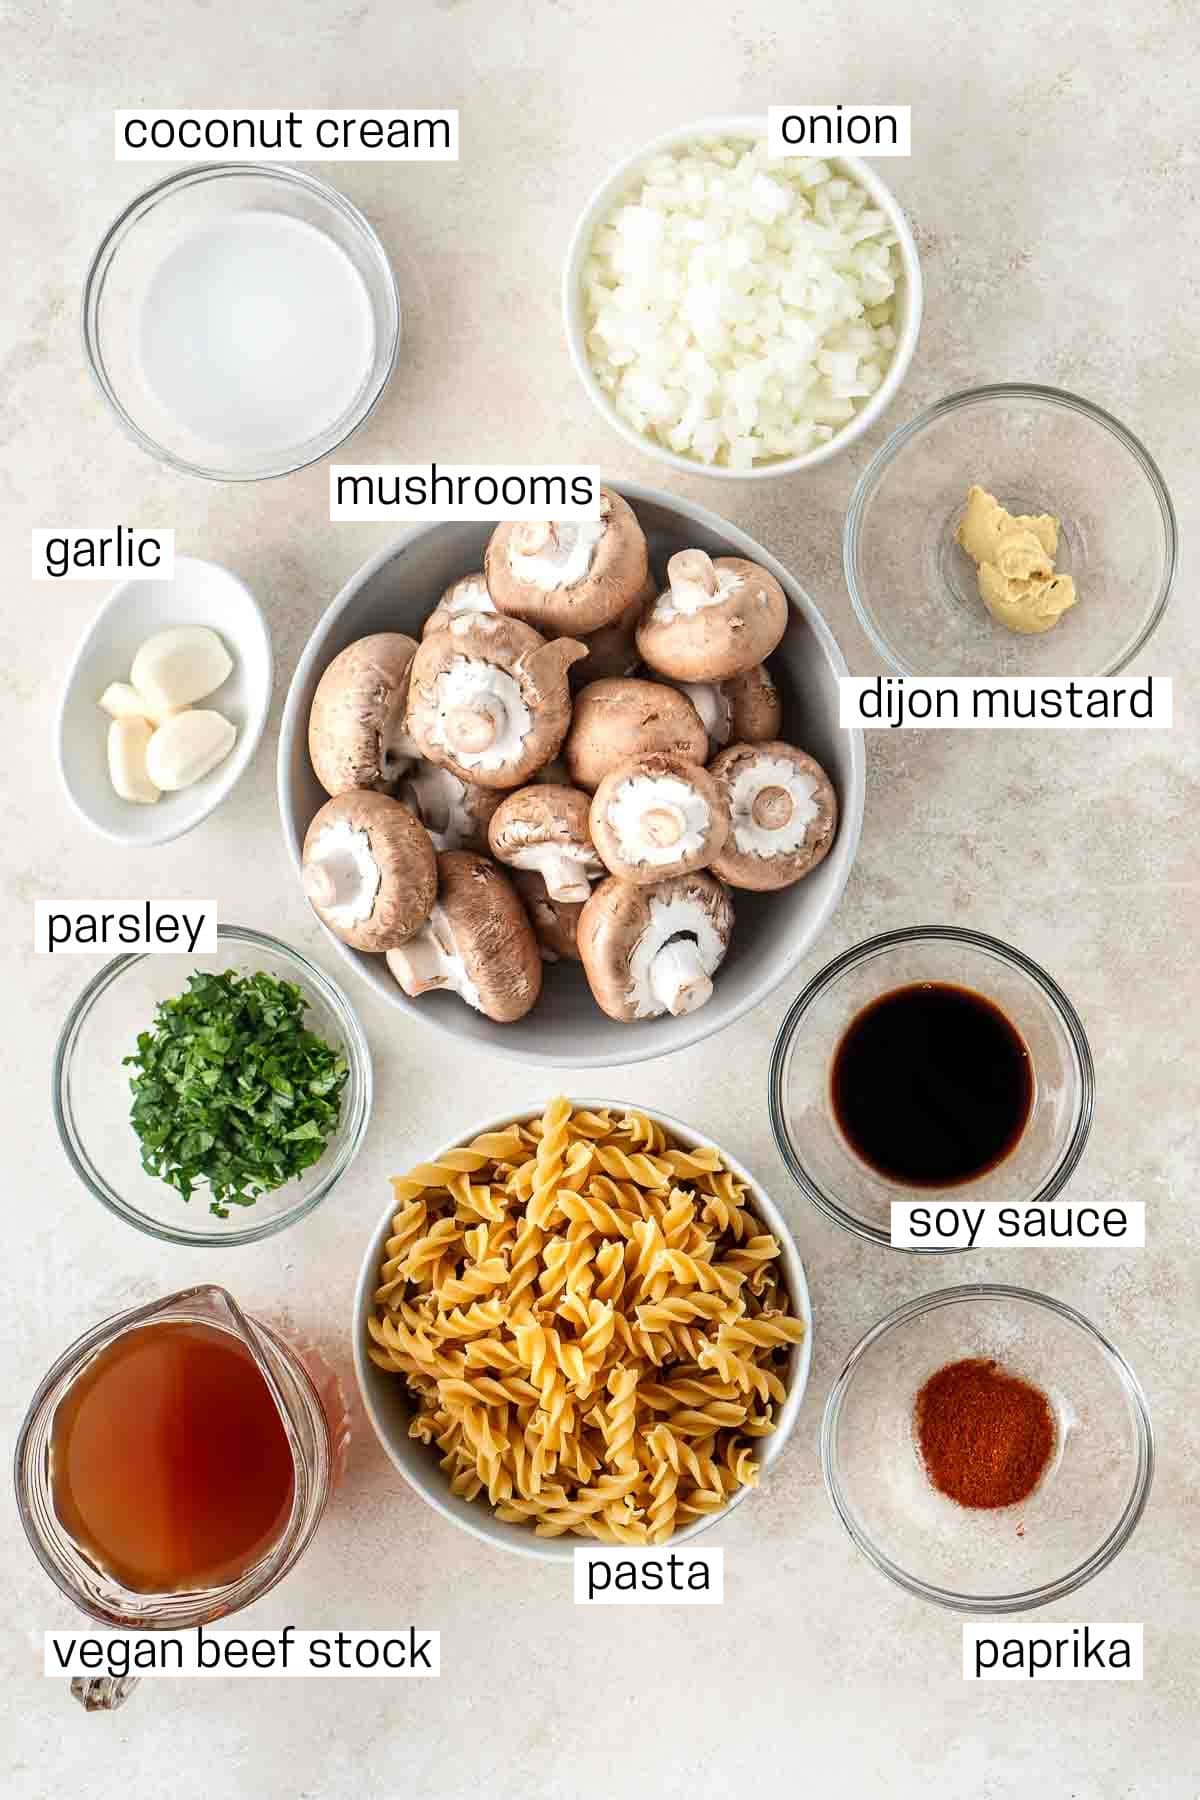 All ingredients needed for mushroom stroganoff laid out in small bowls.